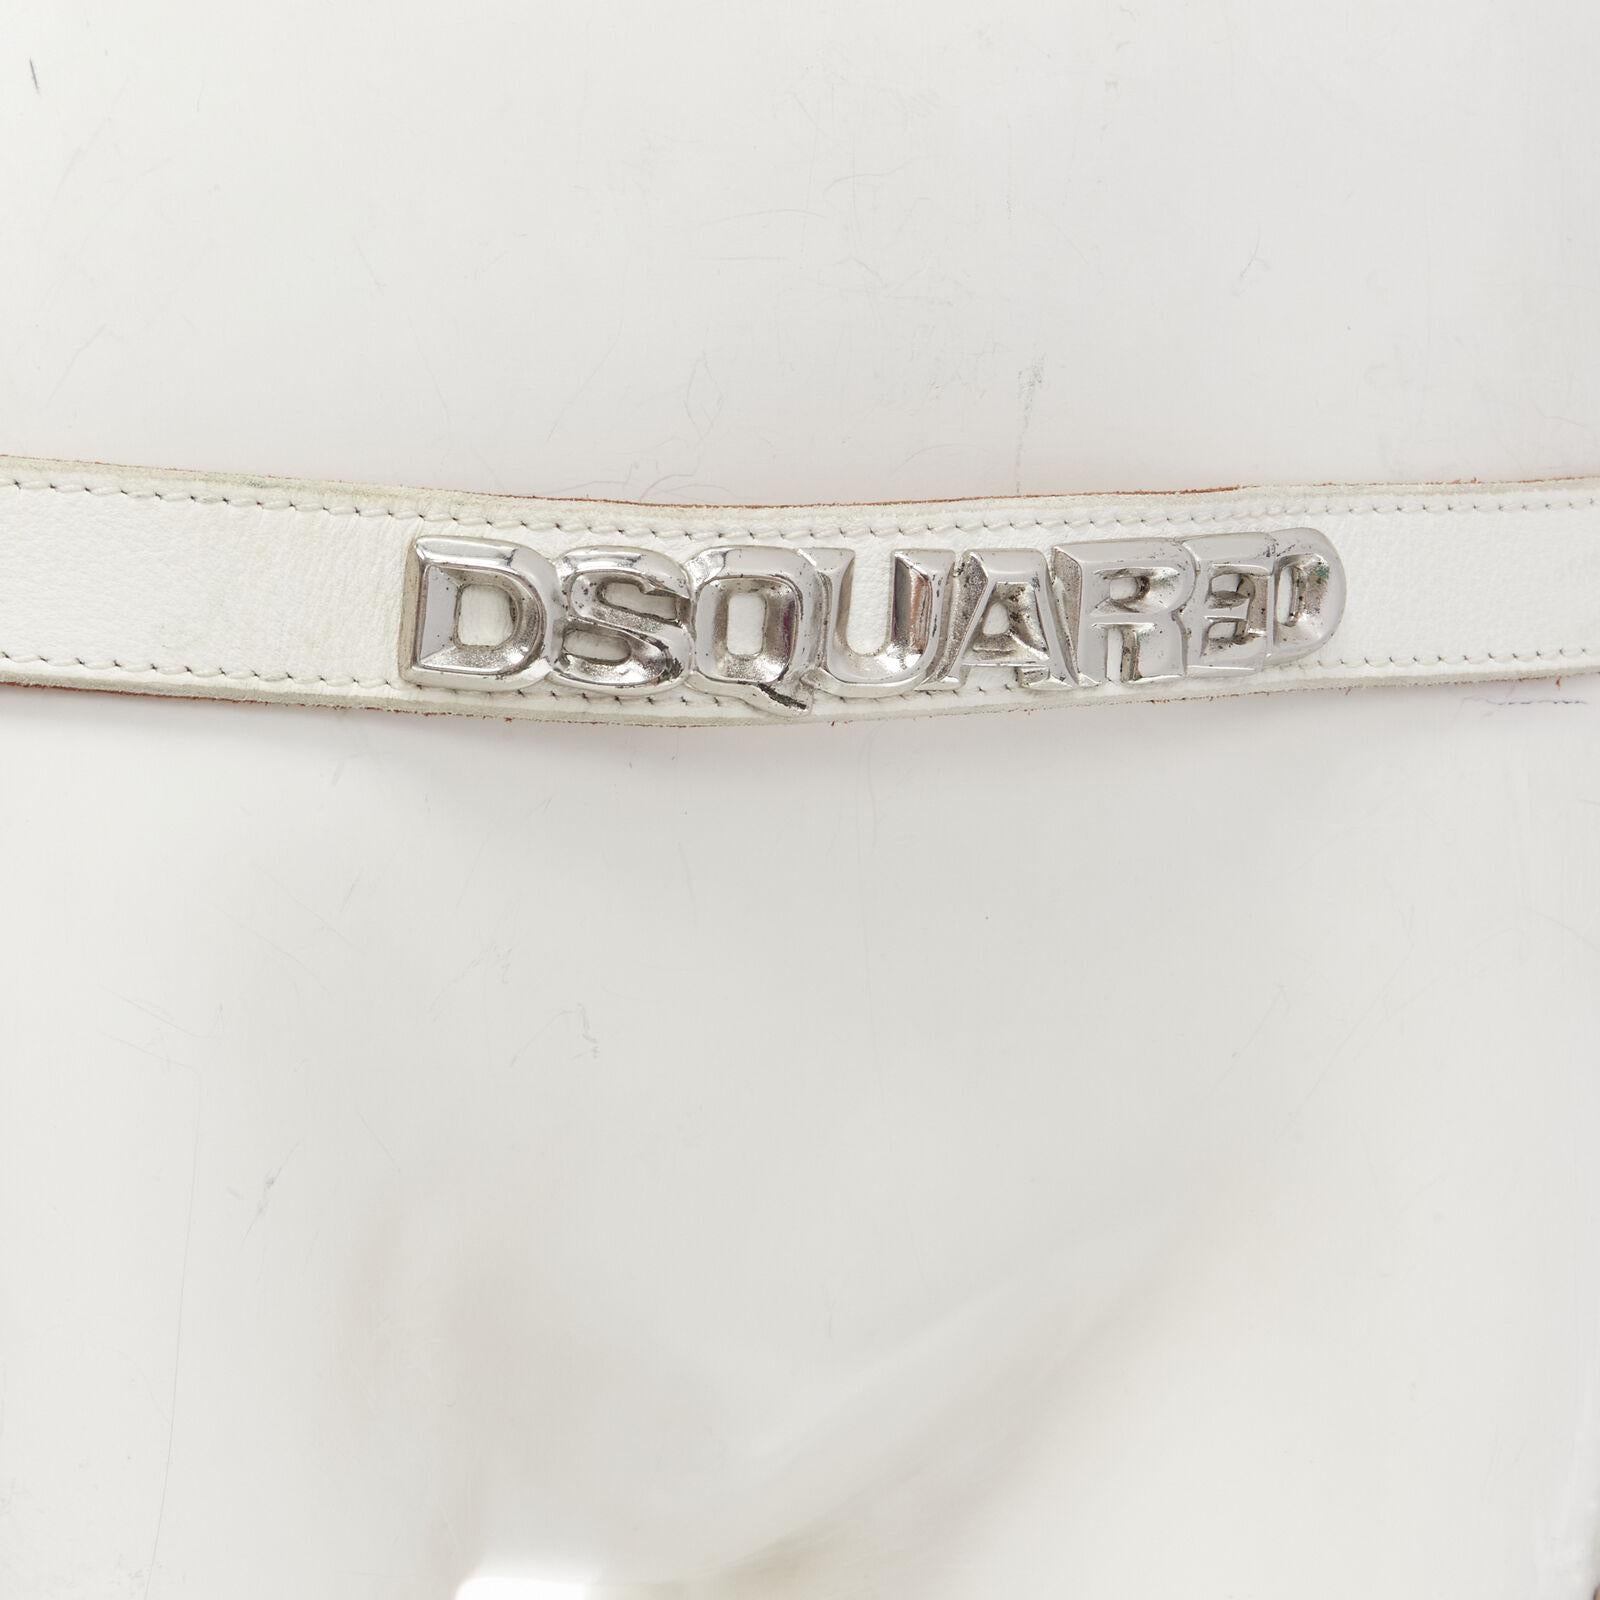 DSQUARED2 Vintage Y2K white logo leather silver bulldog helmet chain punk belt
Reference: ANWU/A00888
Brand: Dsquared2
Material: Leather
Color: White, Silver
Pattern: Solid
Closure: Snap Buttons
Made in: Italy

CONDITION:
Condition: Fair, this item